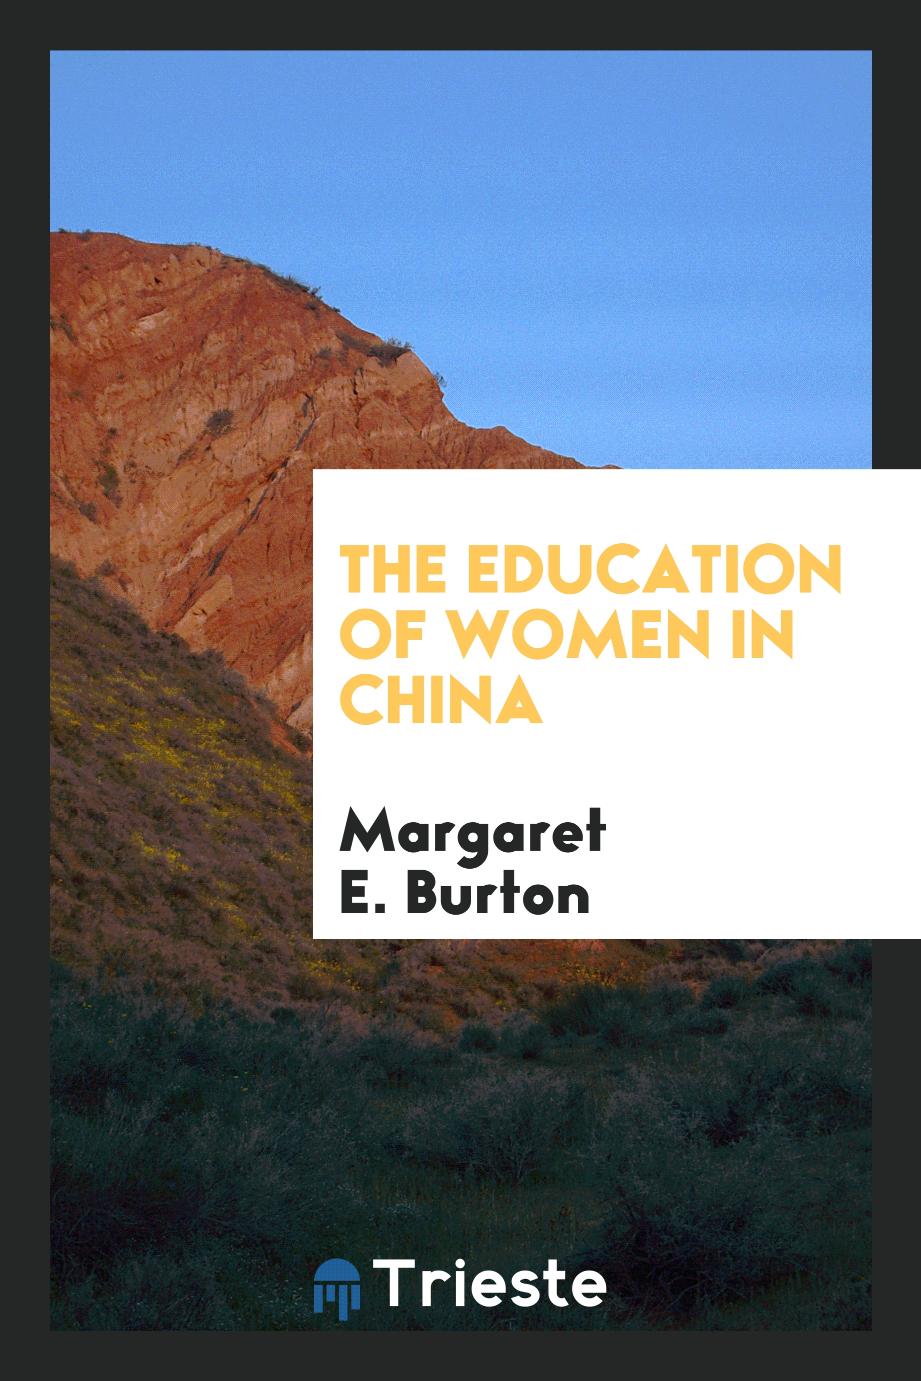 The education of women in China